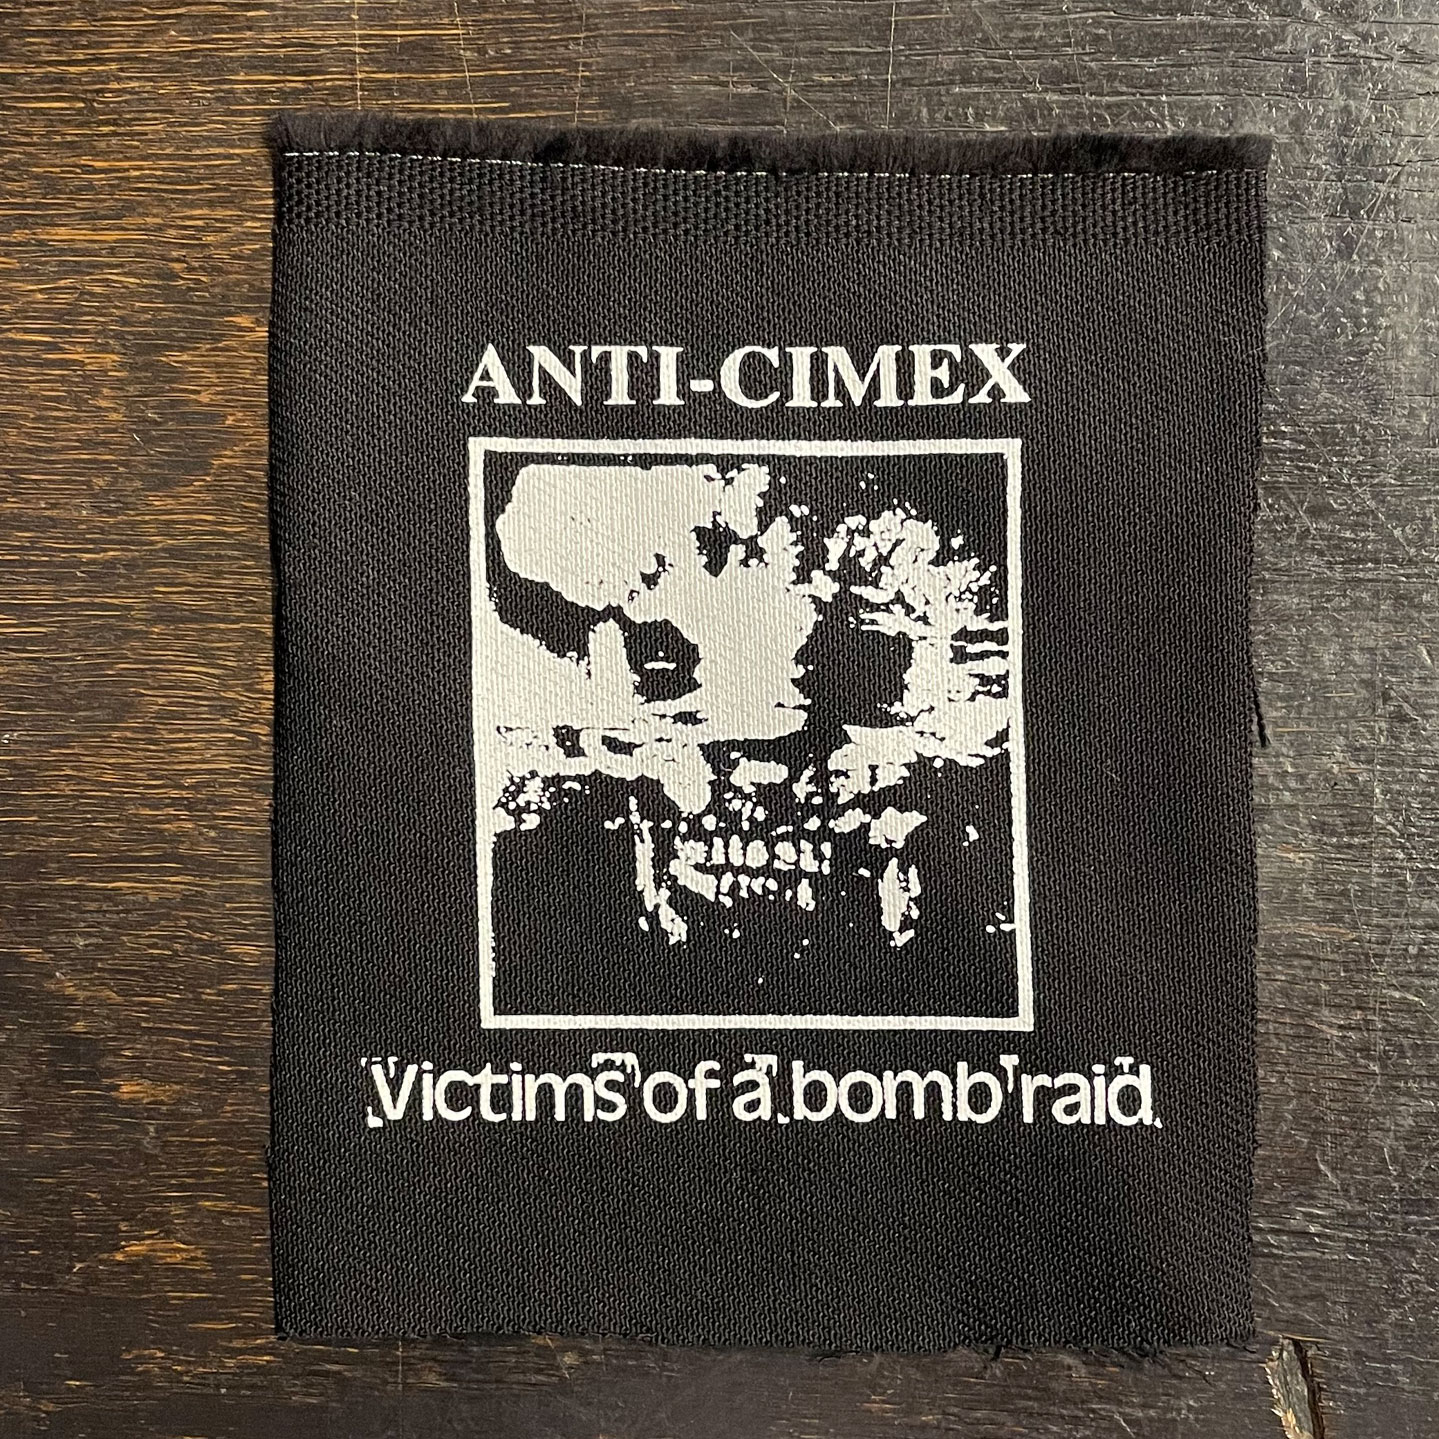 ANTI CIMEX PATCH VICTIMS OF A BOMBRAID